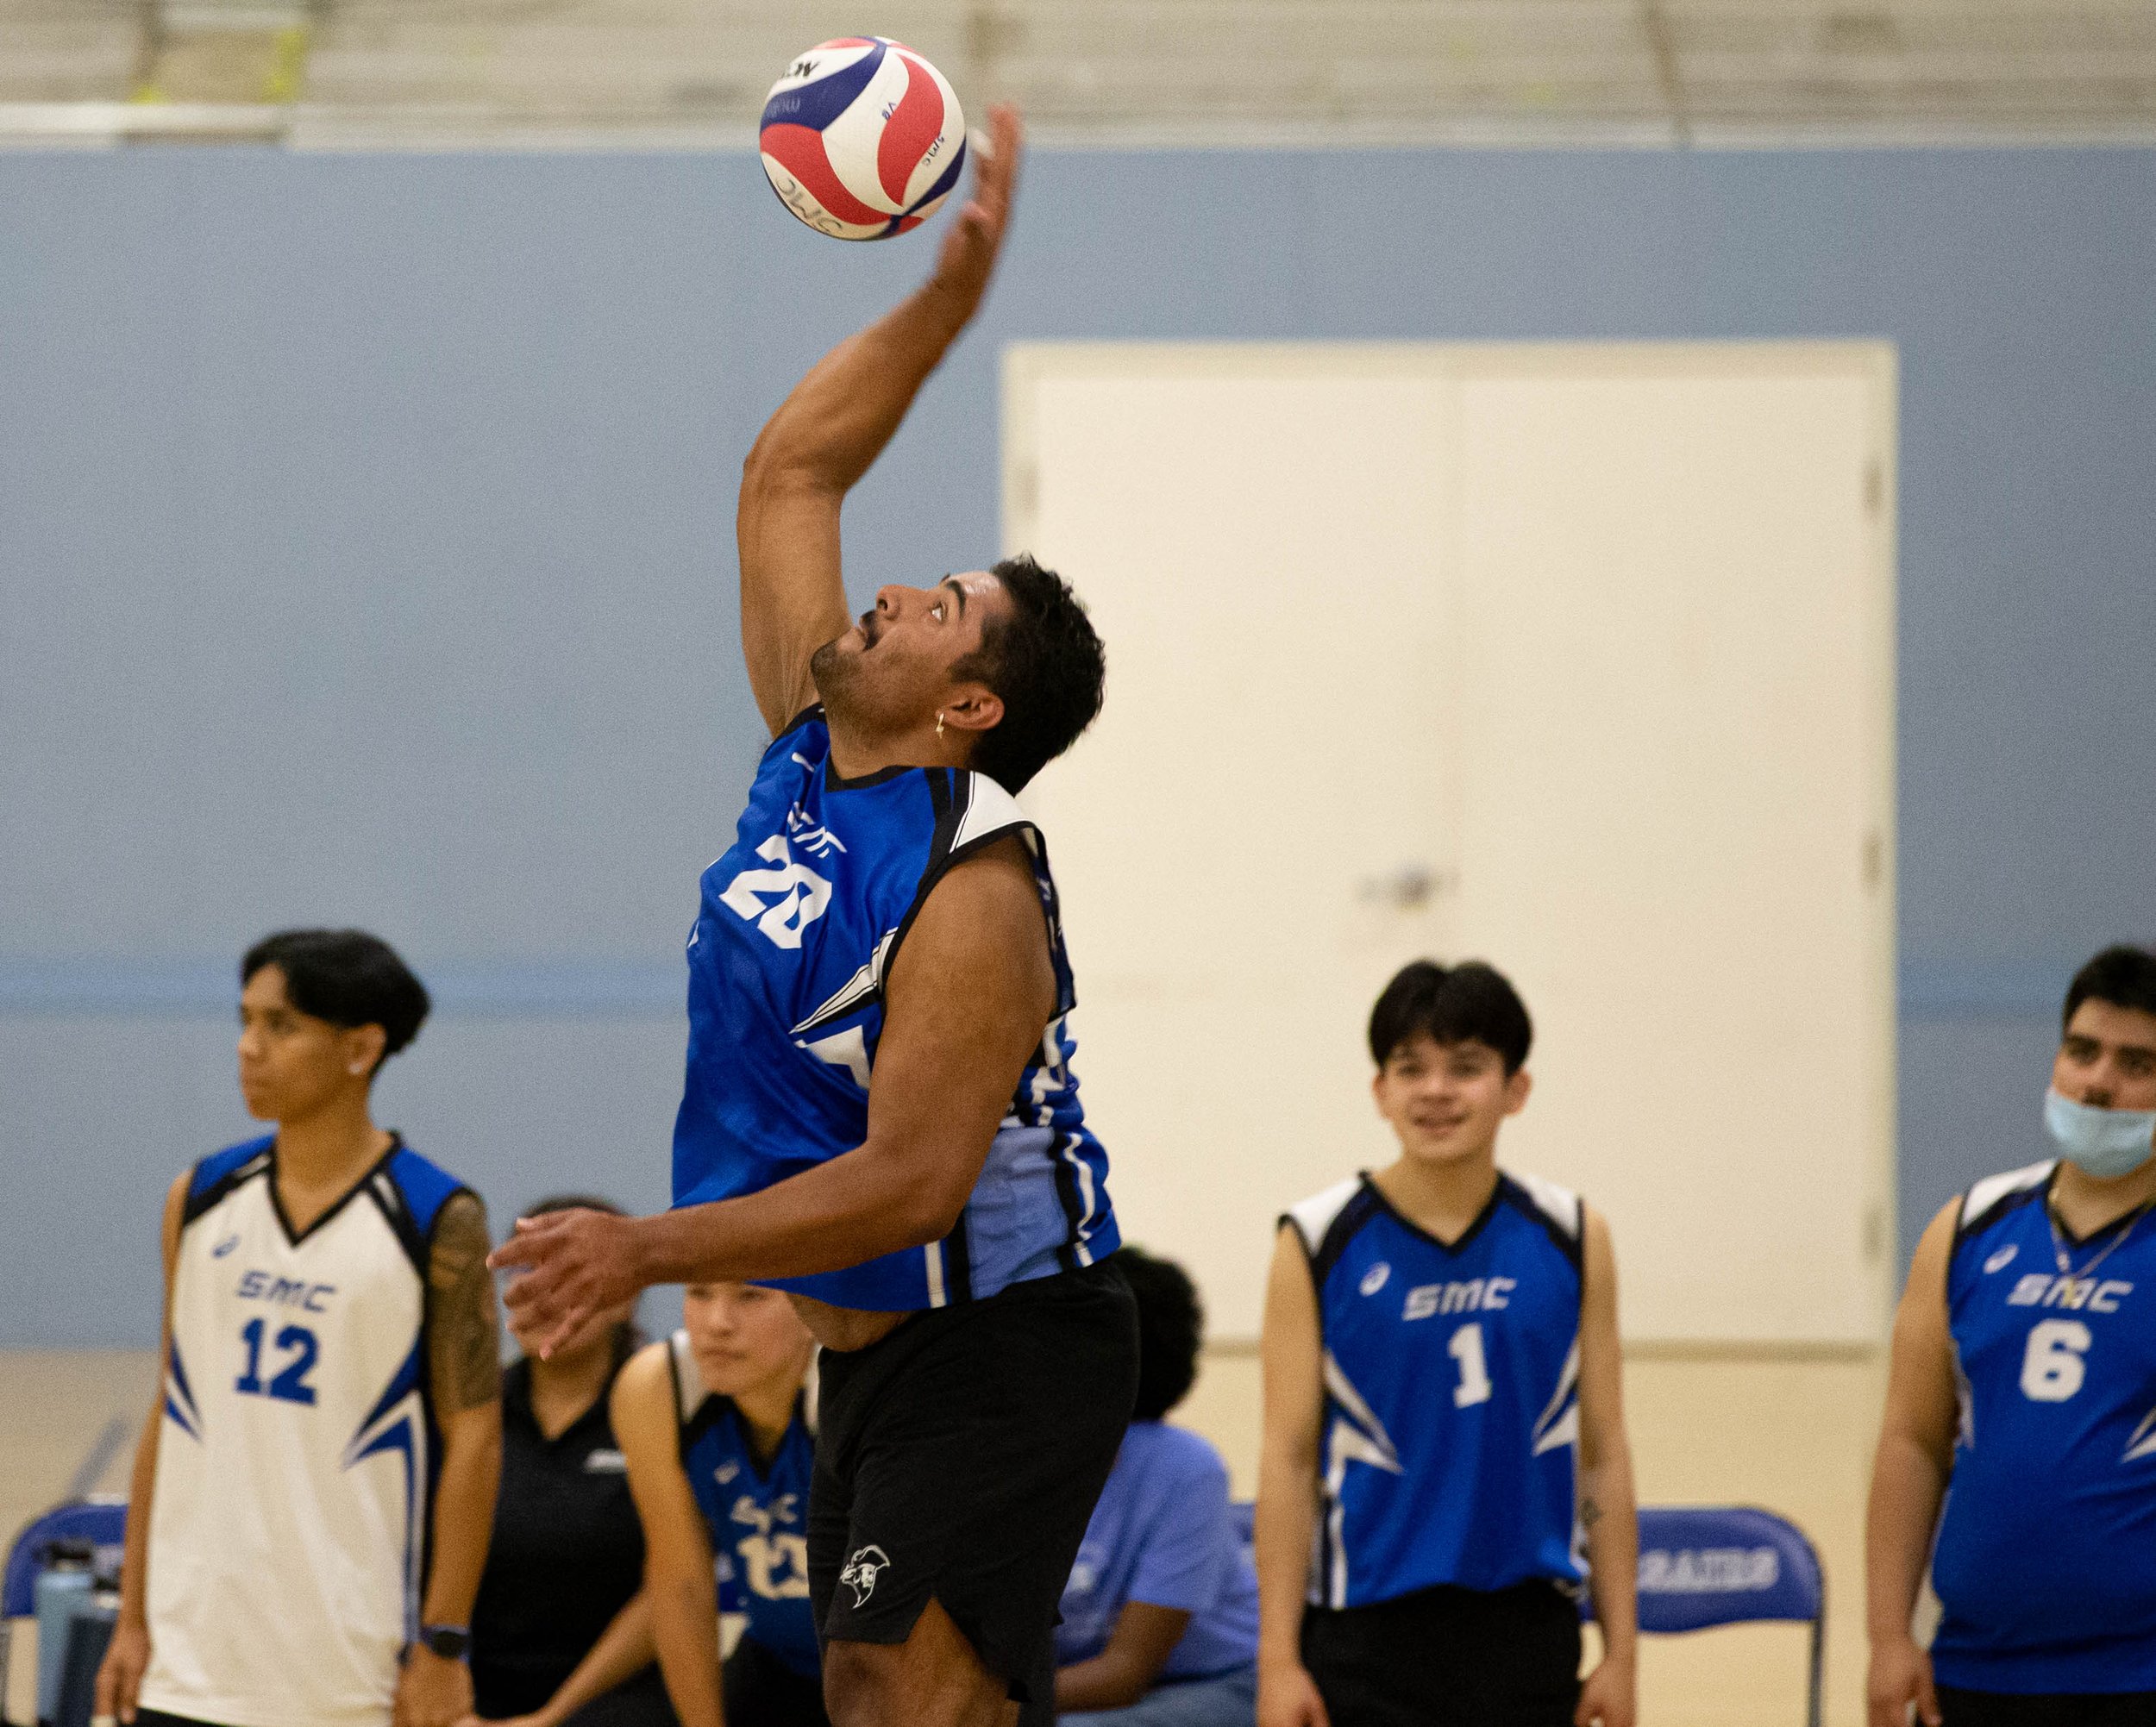  Sergio Carrera(20) from Santa Monica College serving the ball during the Corsairs match against L.A. Pierce College on Wed. March 15, 2023 in the SMC Pavillion at Santa Monica, Calif. (Danilo Perez | The Corsair) 